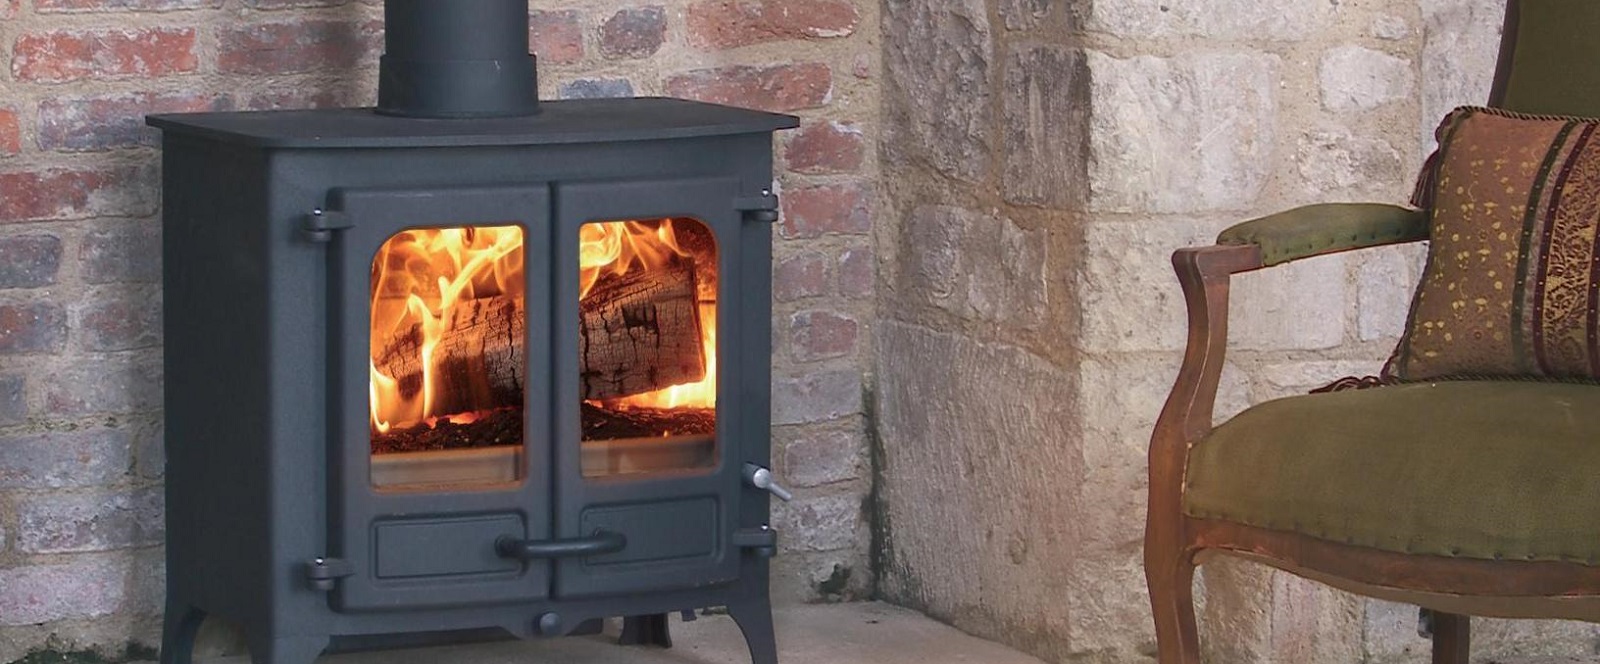 Firecrest Installations & Services Wood Burning Stove Installation on the Isle of Wight